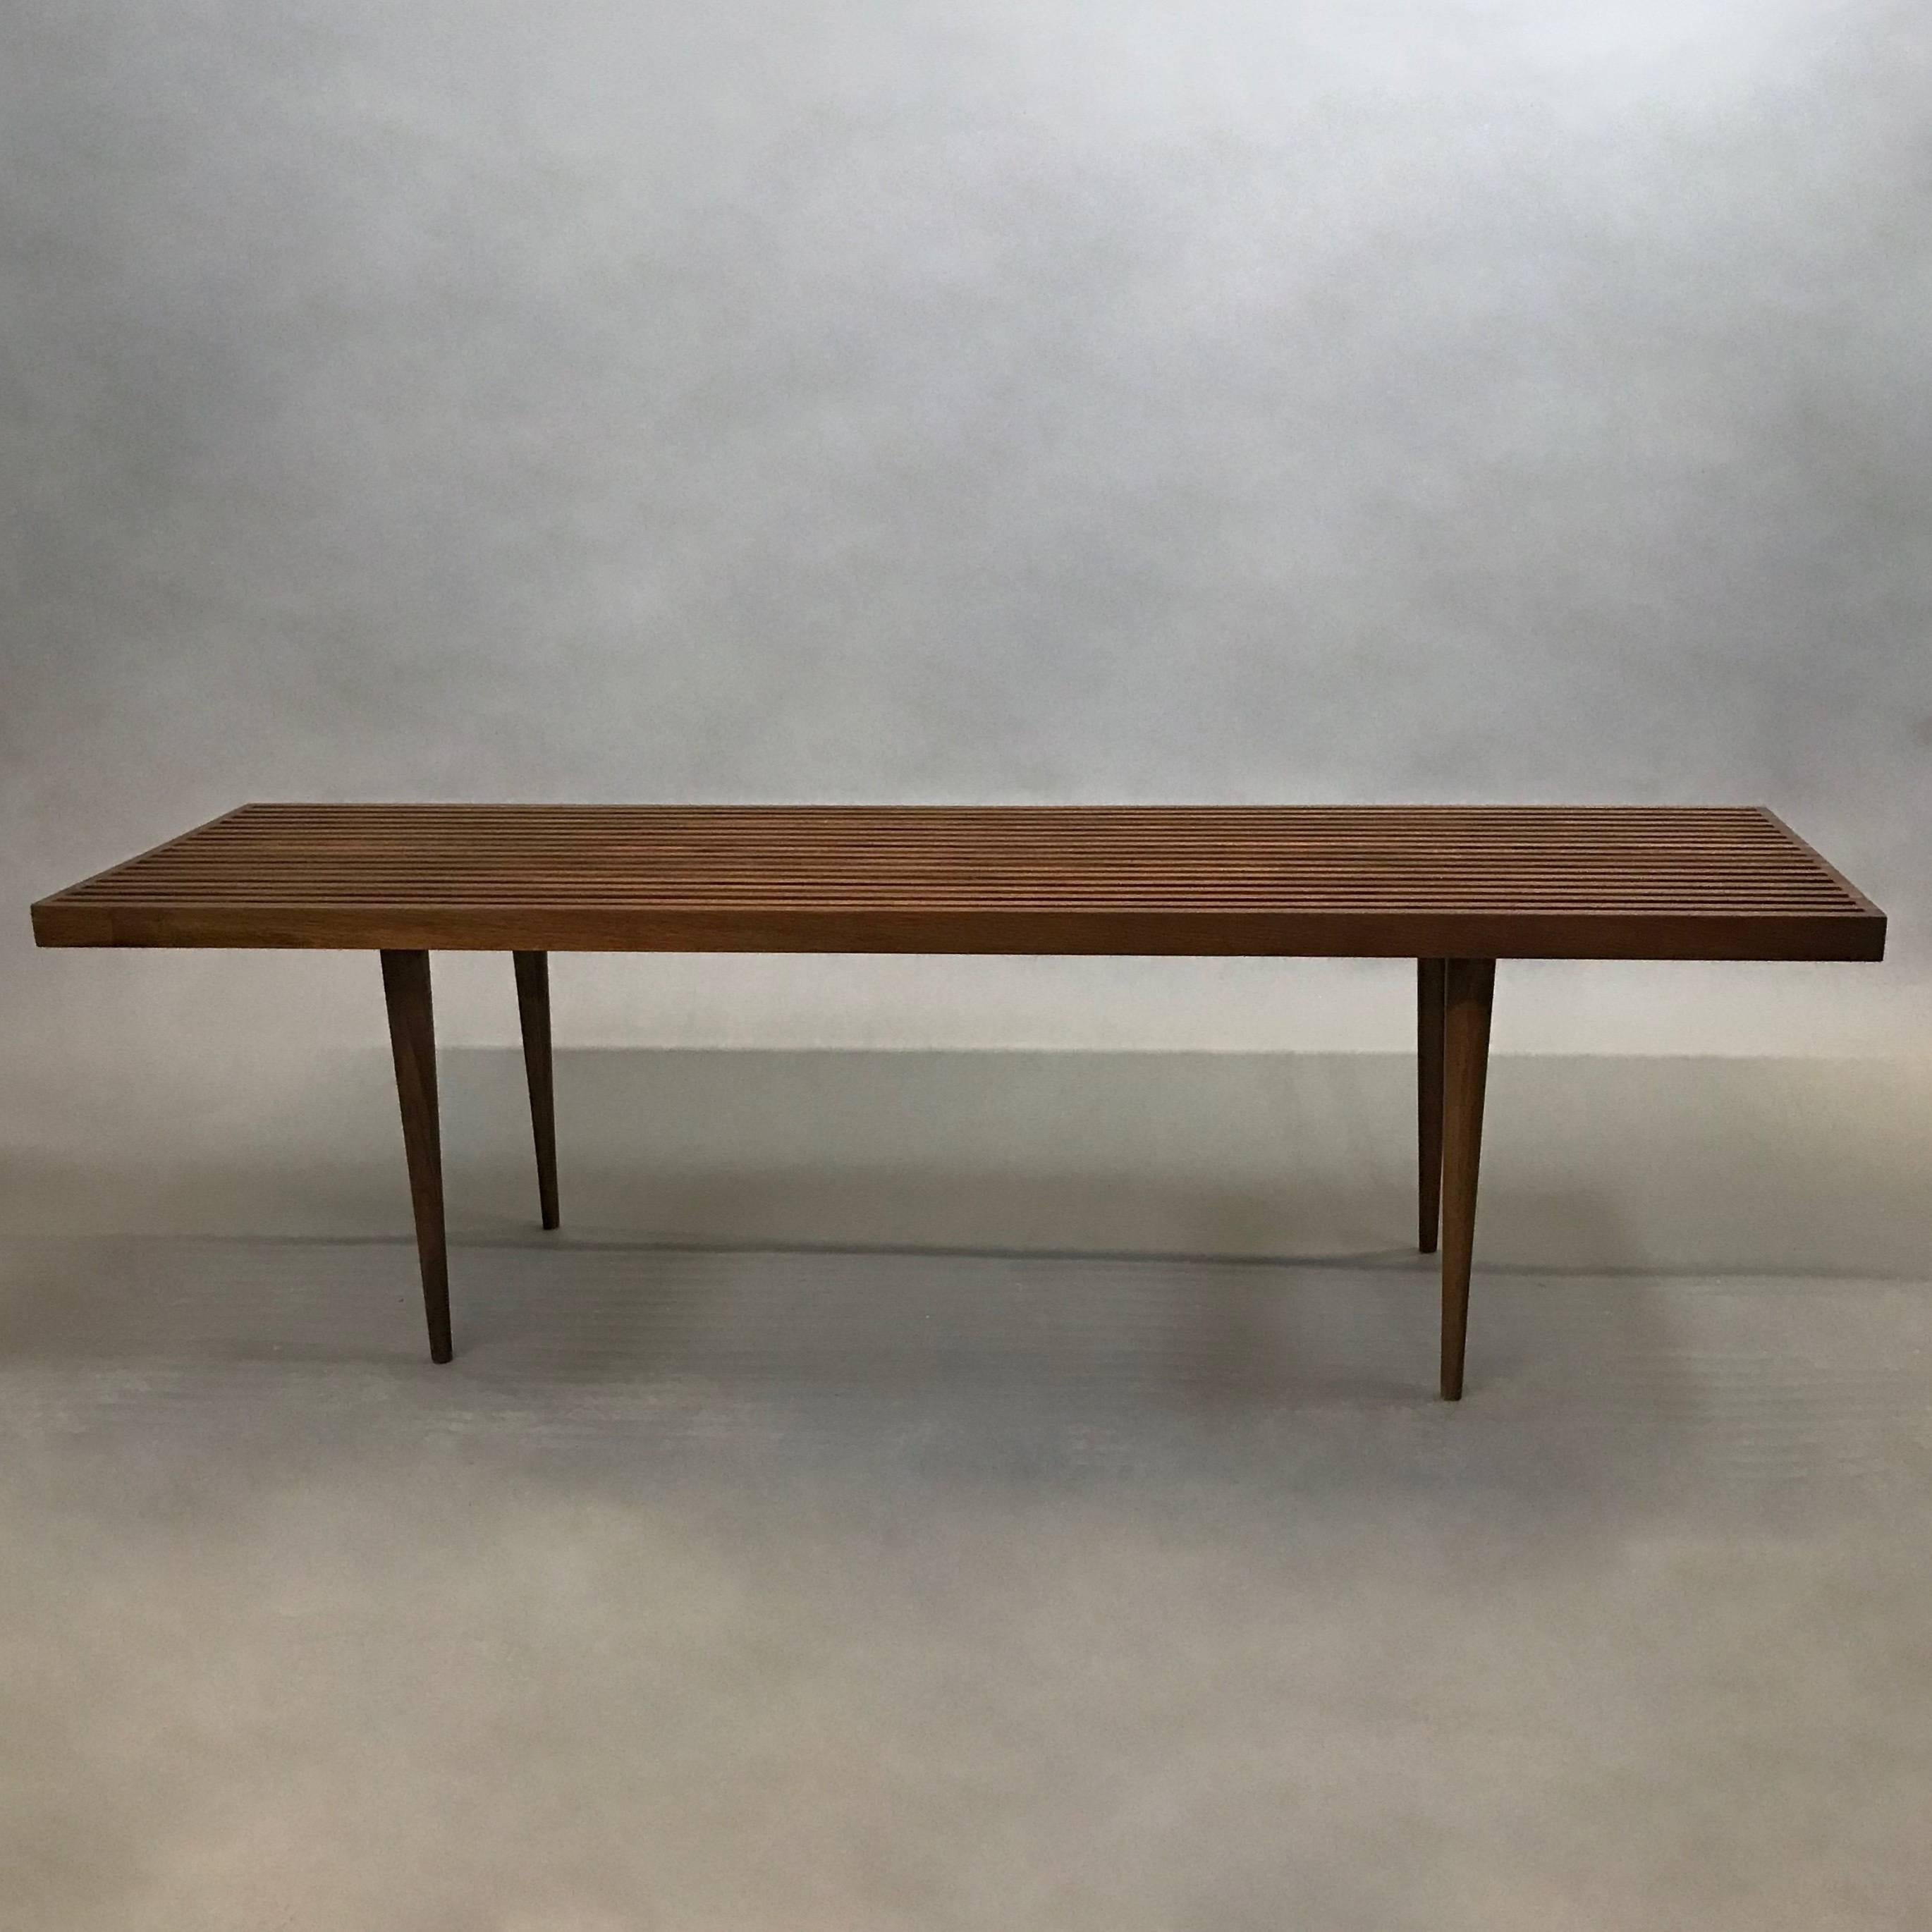 Mid-Century Modern, slatted walnut bench or coffee table with elegant dovetail details and tapered legs designed by Mel Smilow.